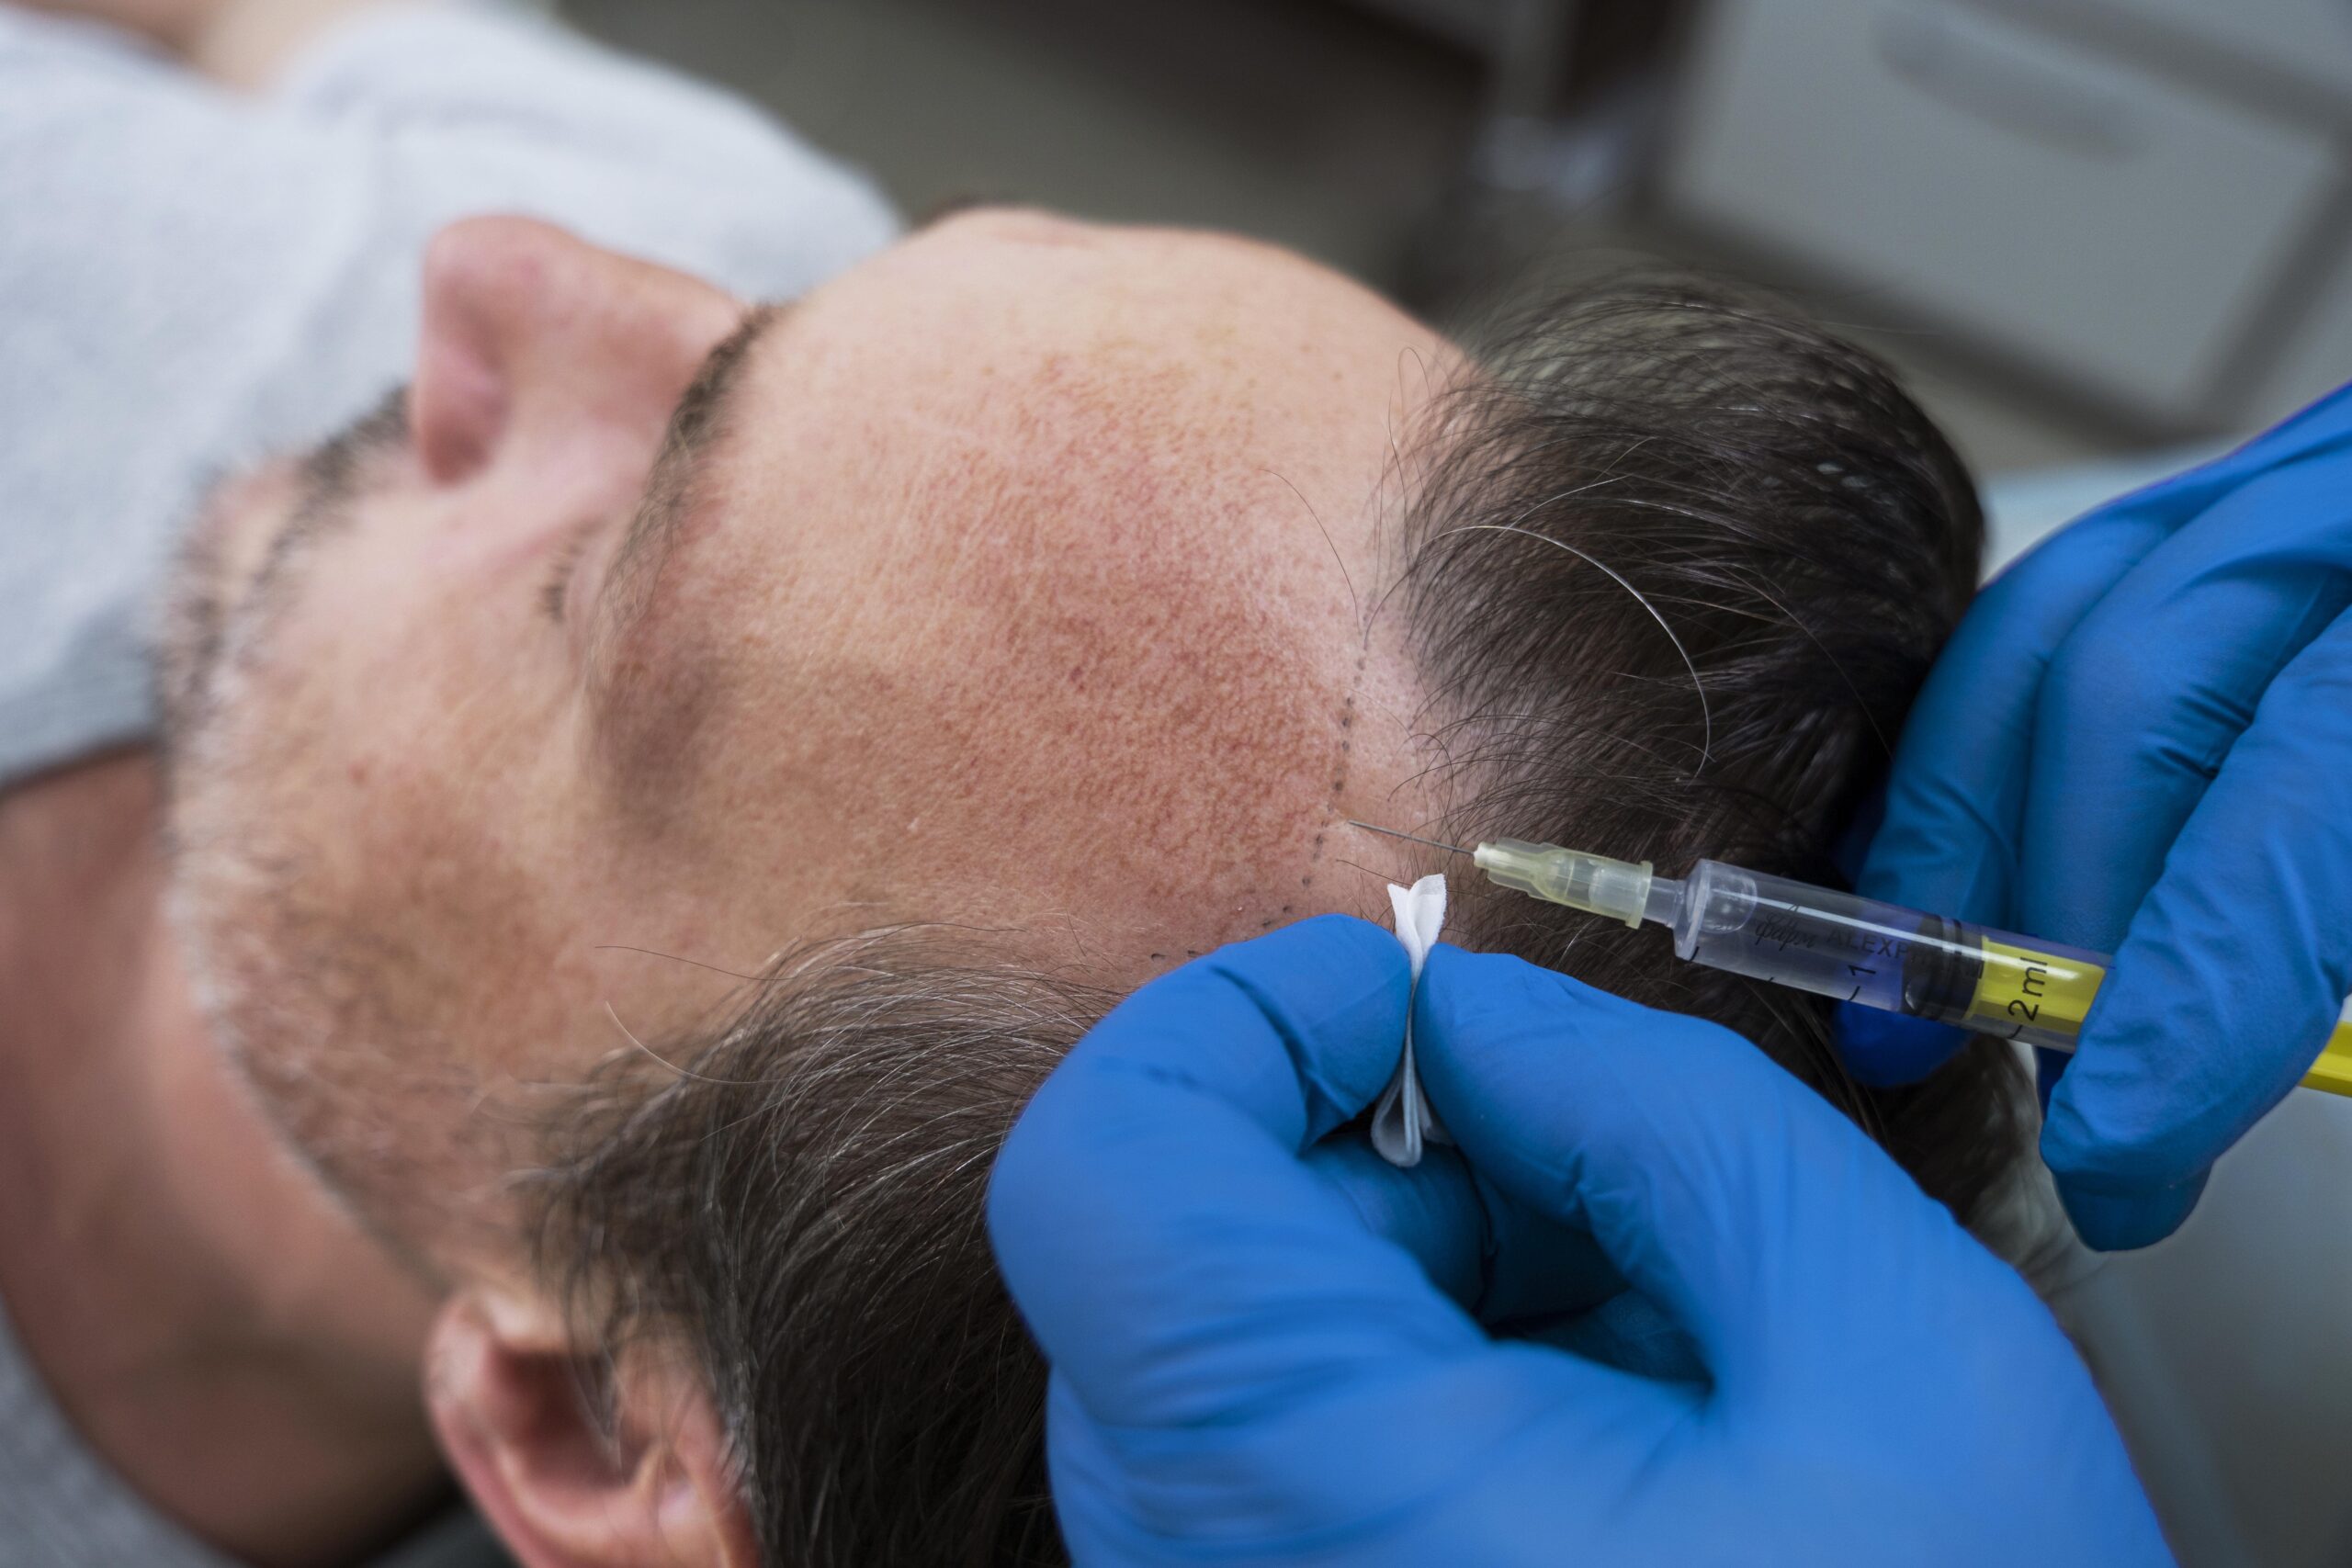 What is Unshaven Hair Transplant? – Is Unshaven Hair Transplant Better?